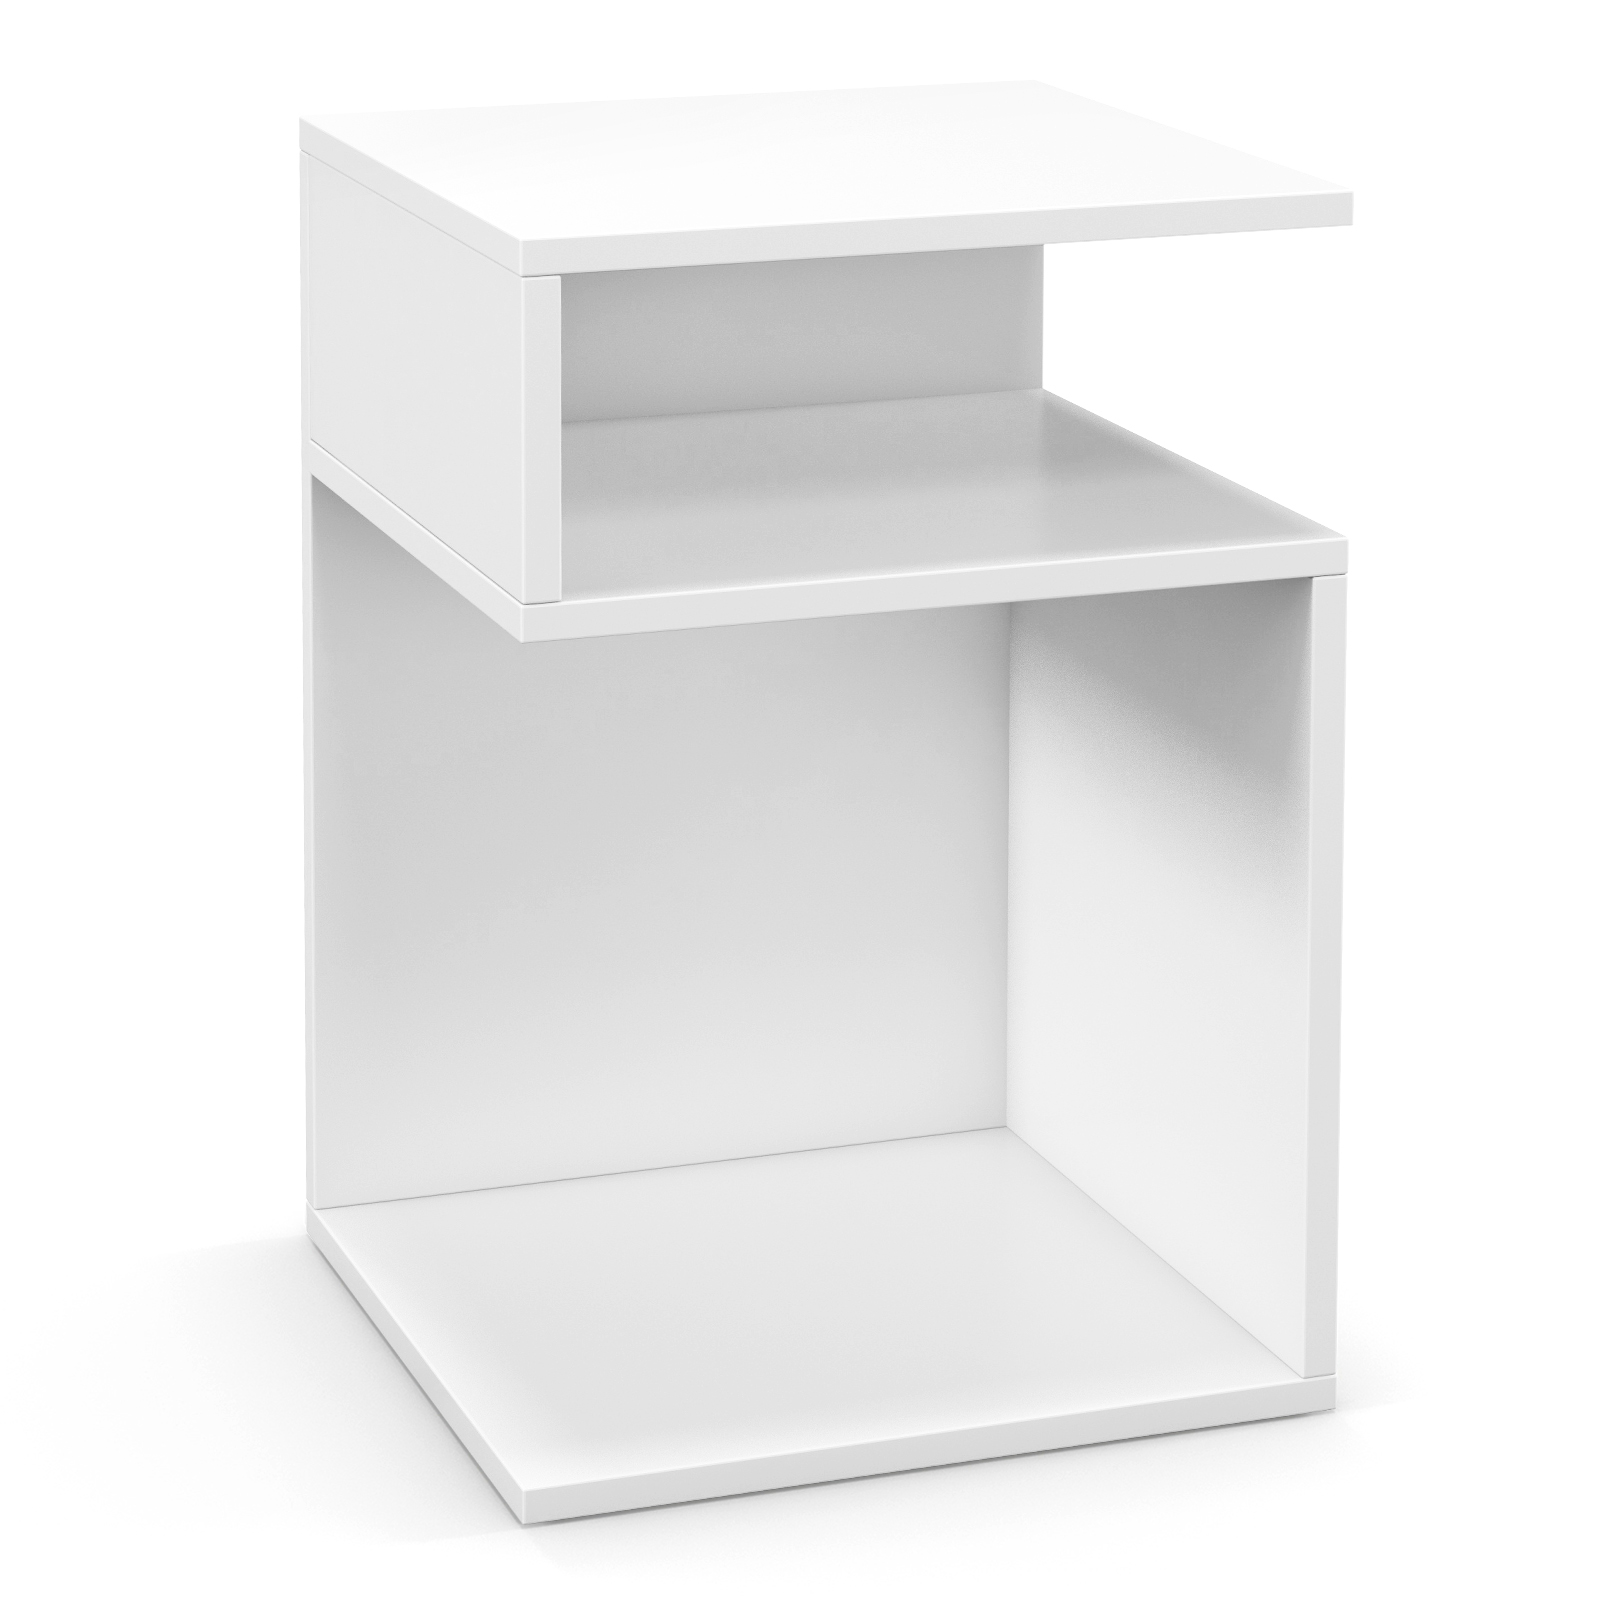 S_Shaped_Side_Table_with_2_Open_Compartments-7.jpg